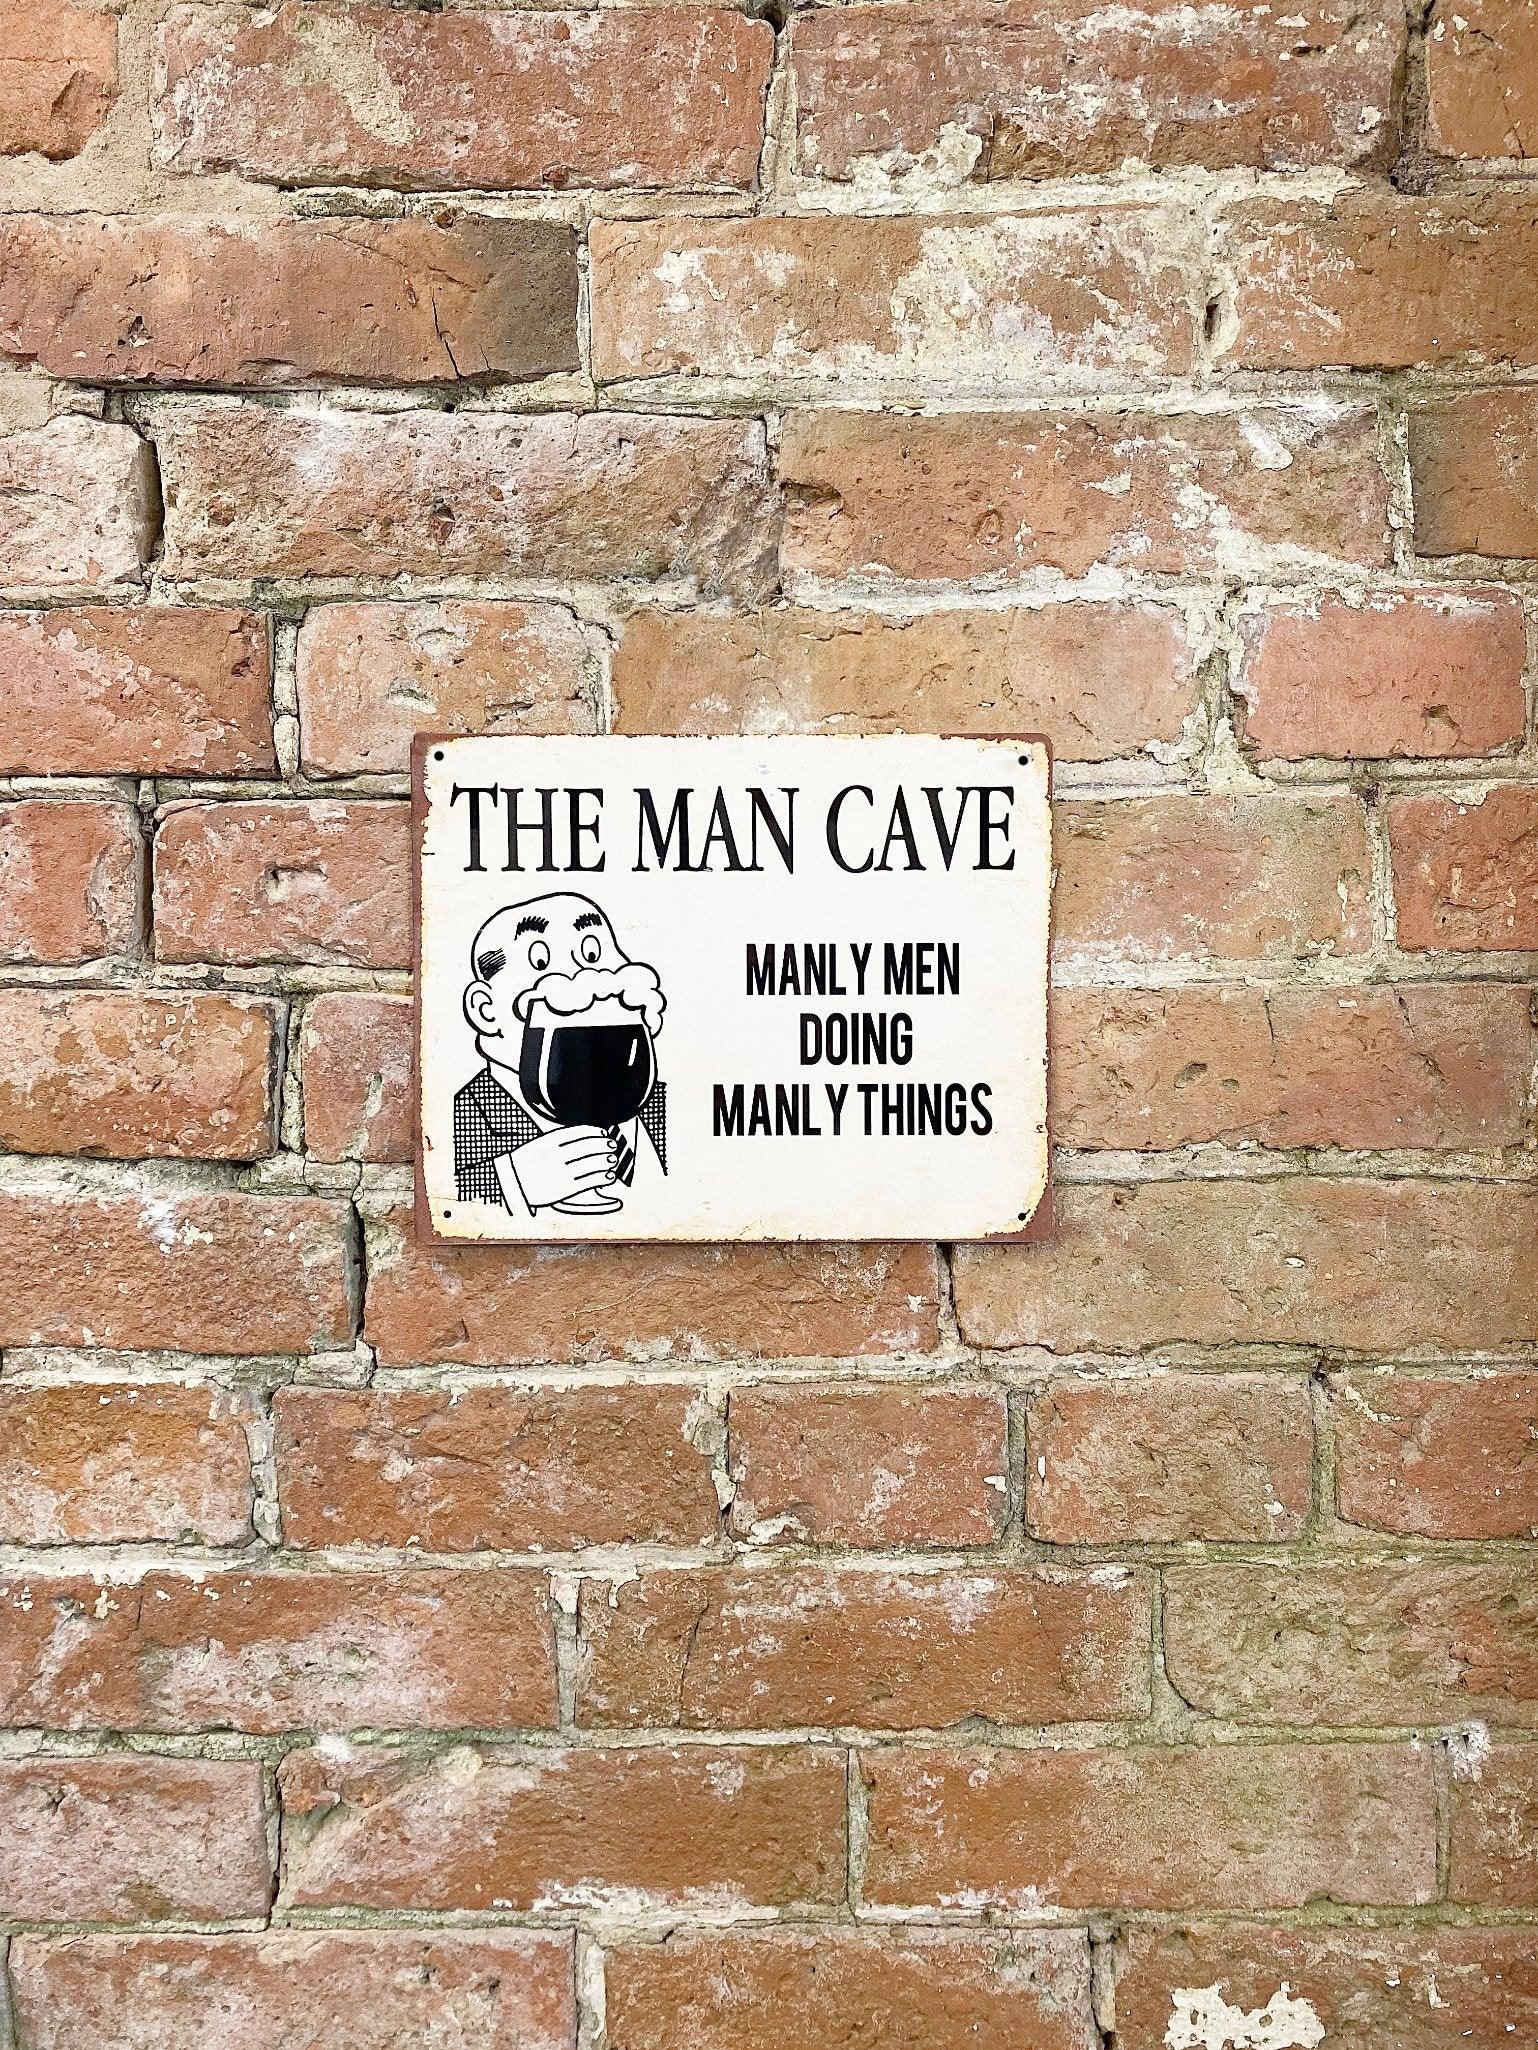 View Metal Art WallDoor Sign Man Cave Manly Men Doing Manly Things information